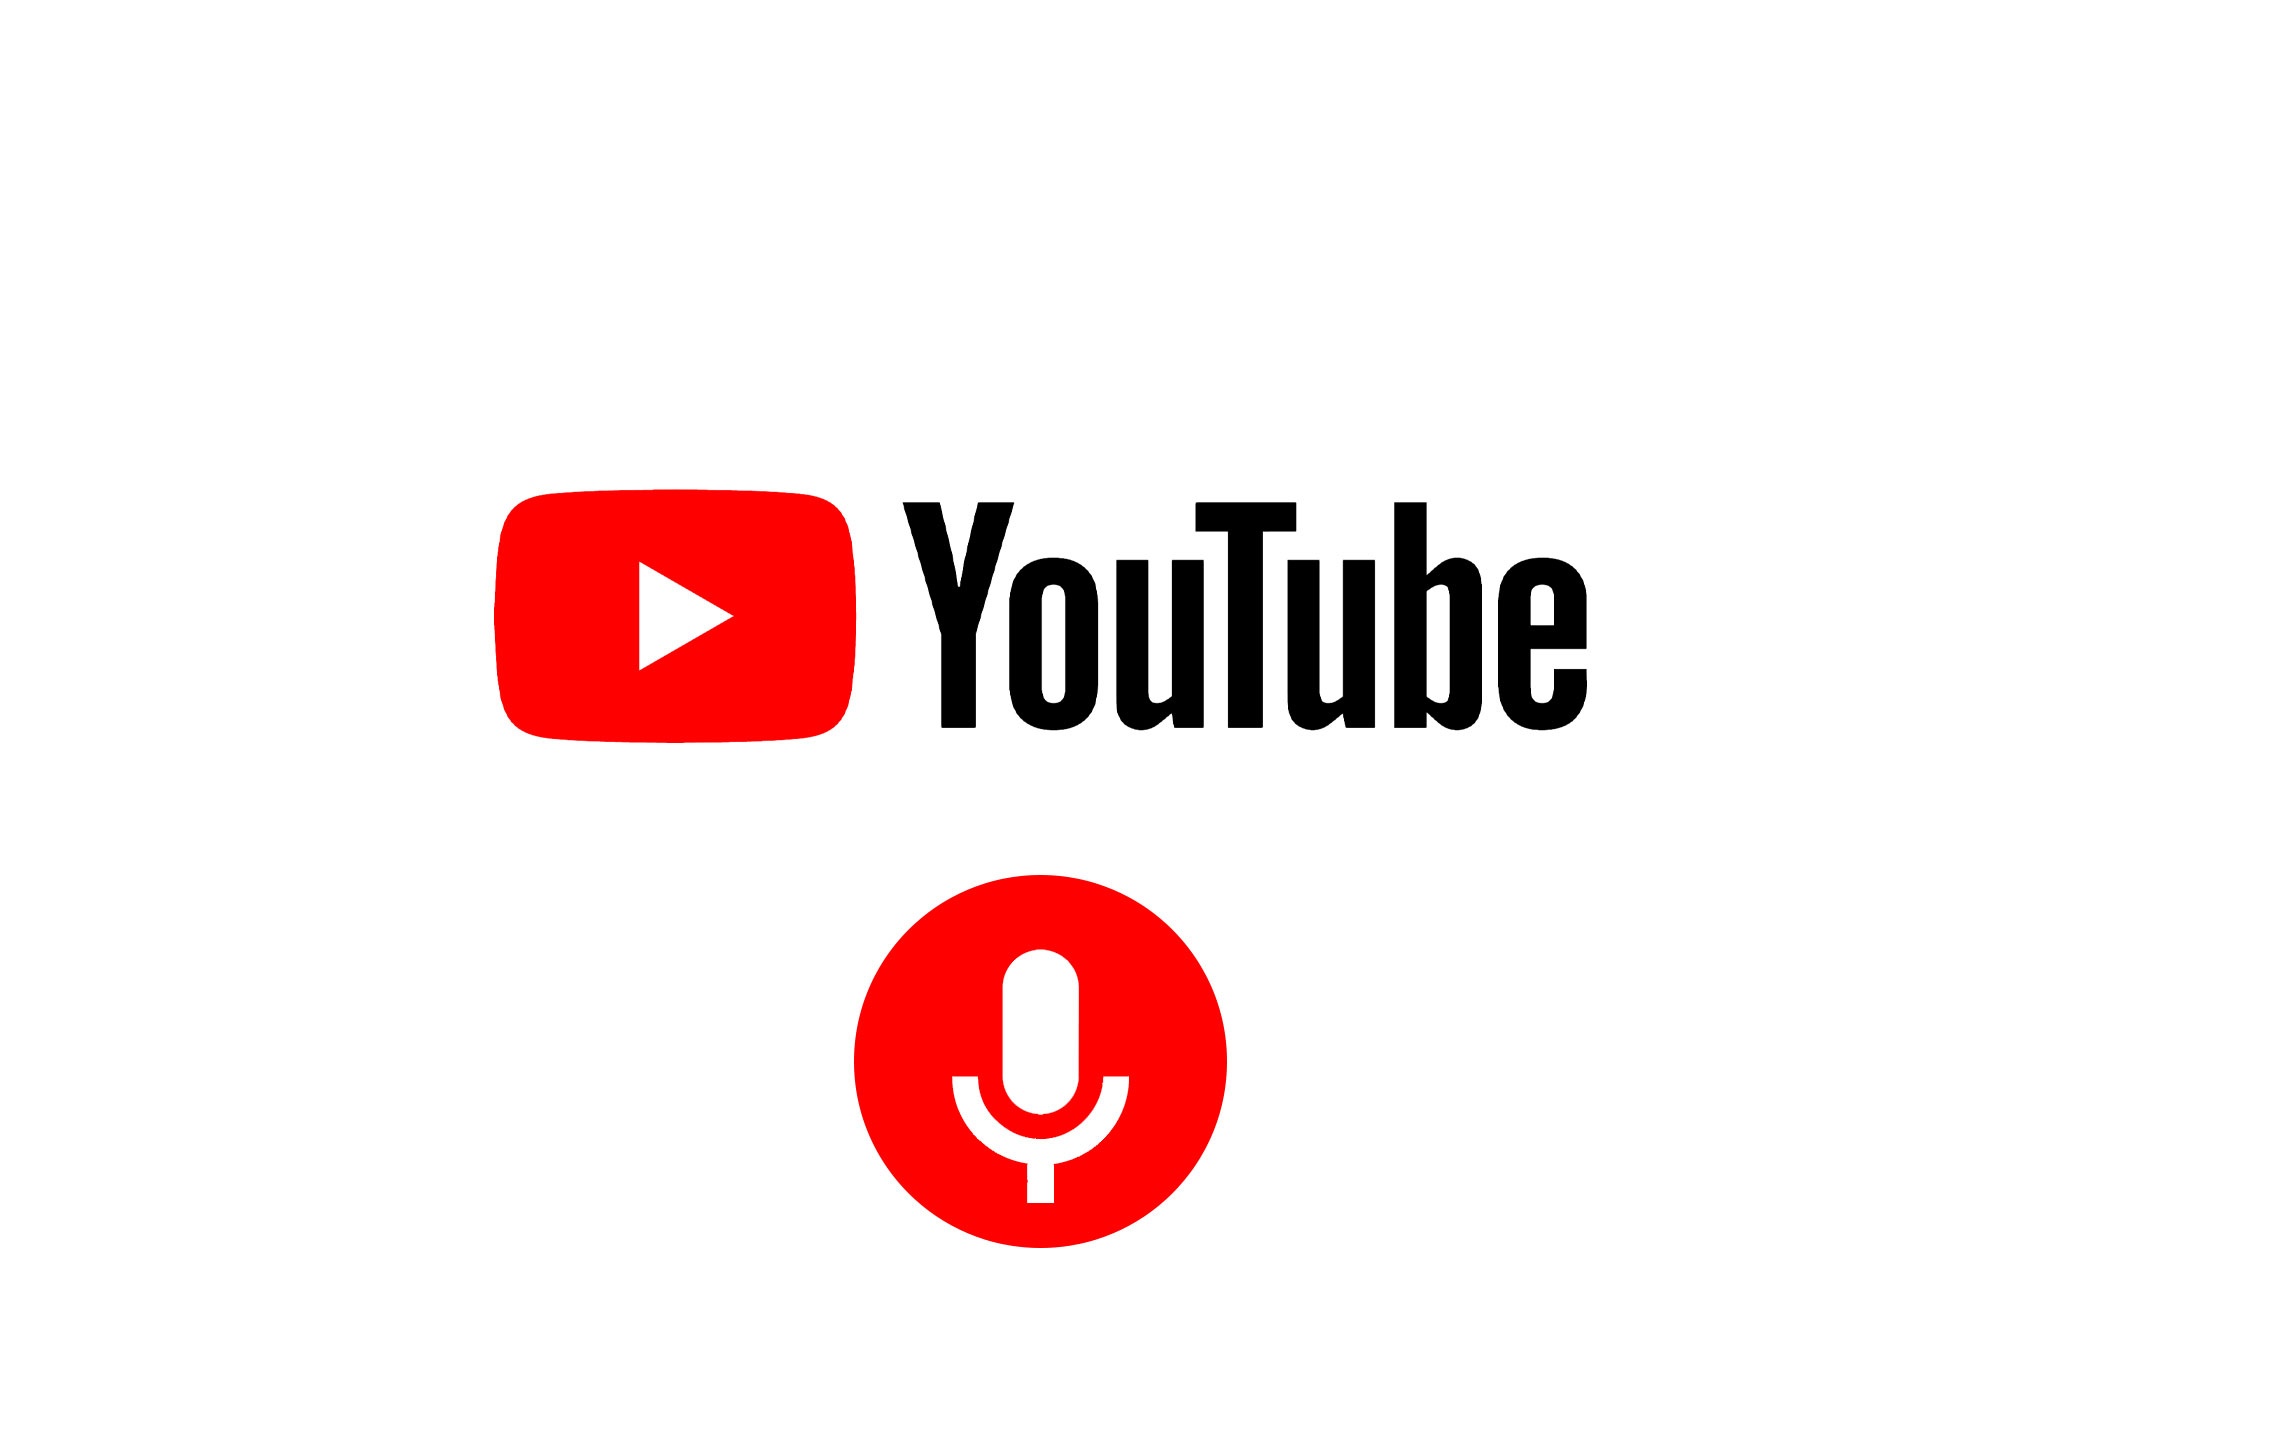 YouTube adds voice search to mobile app